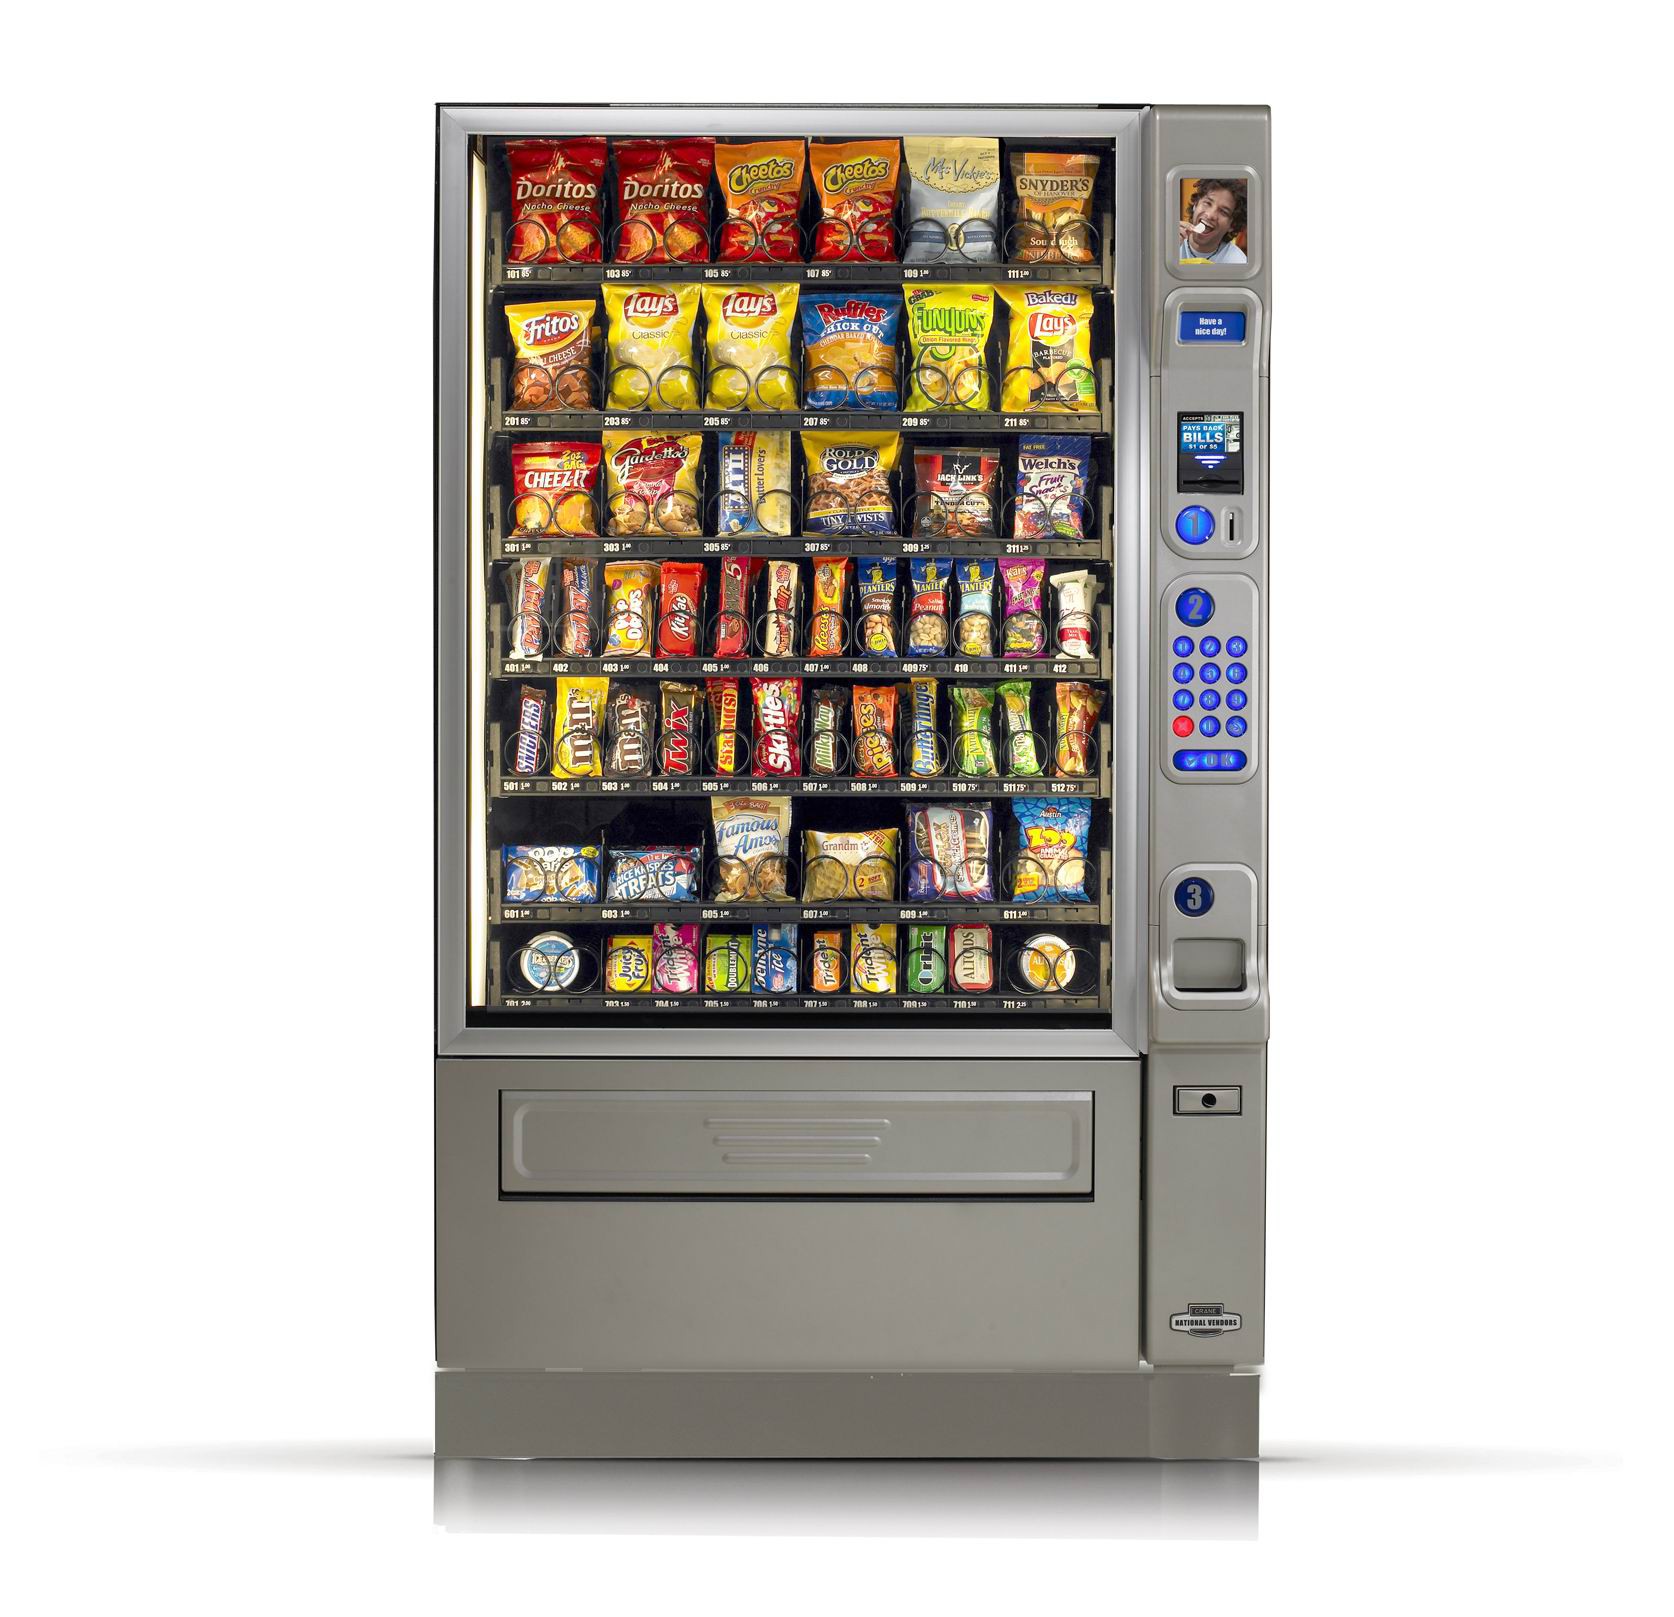 Why Vending Machine Is So Important